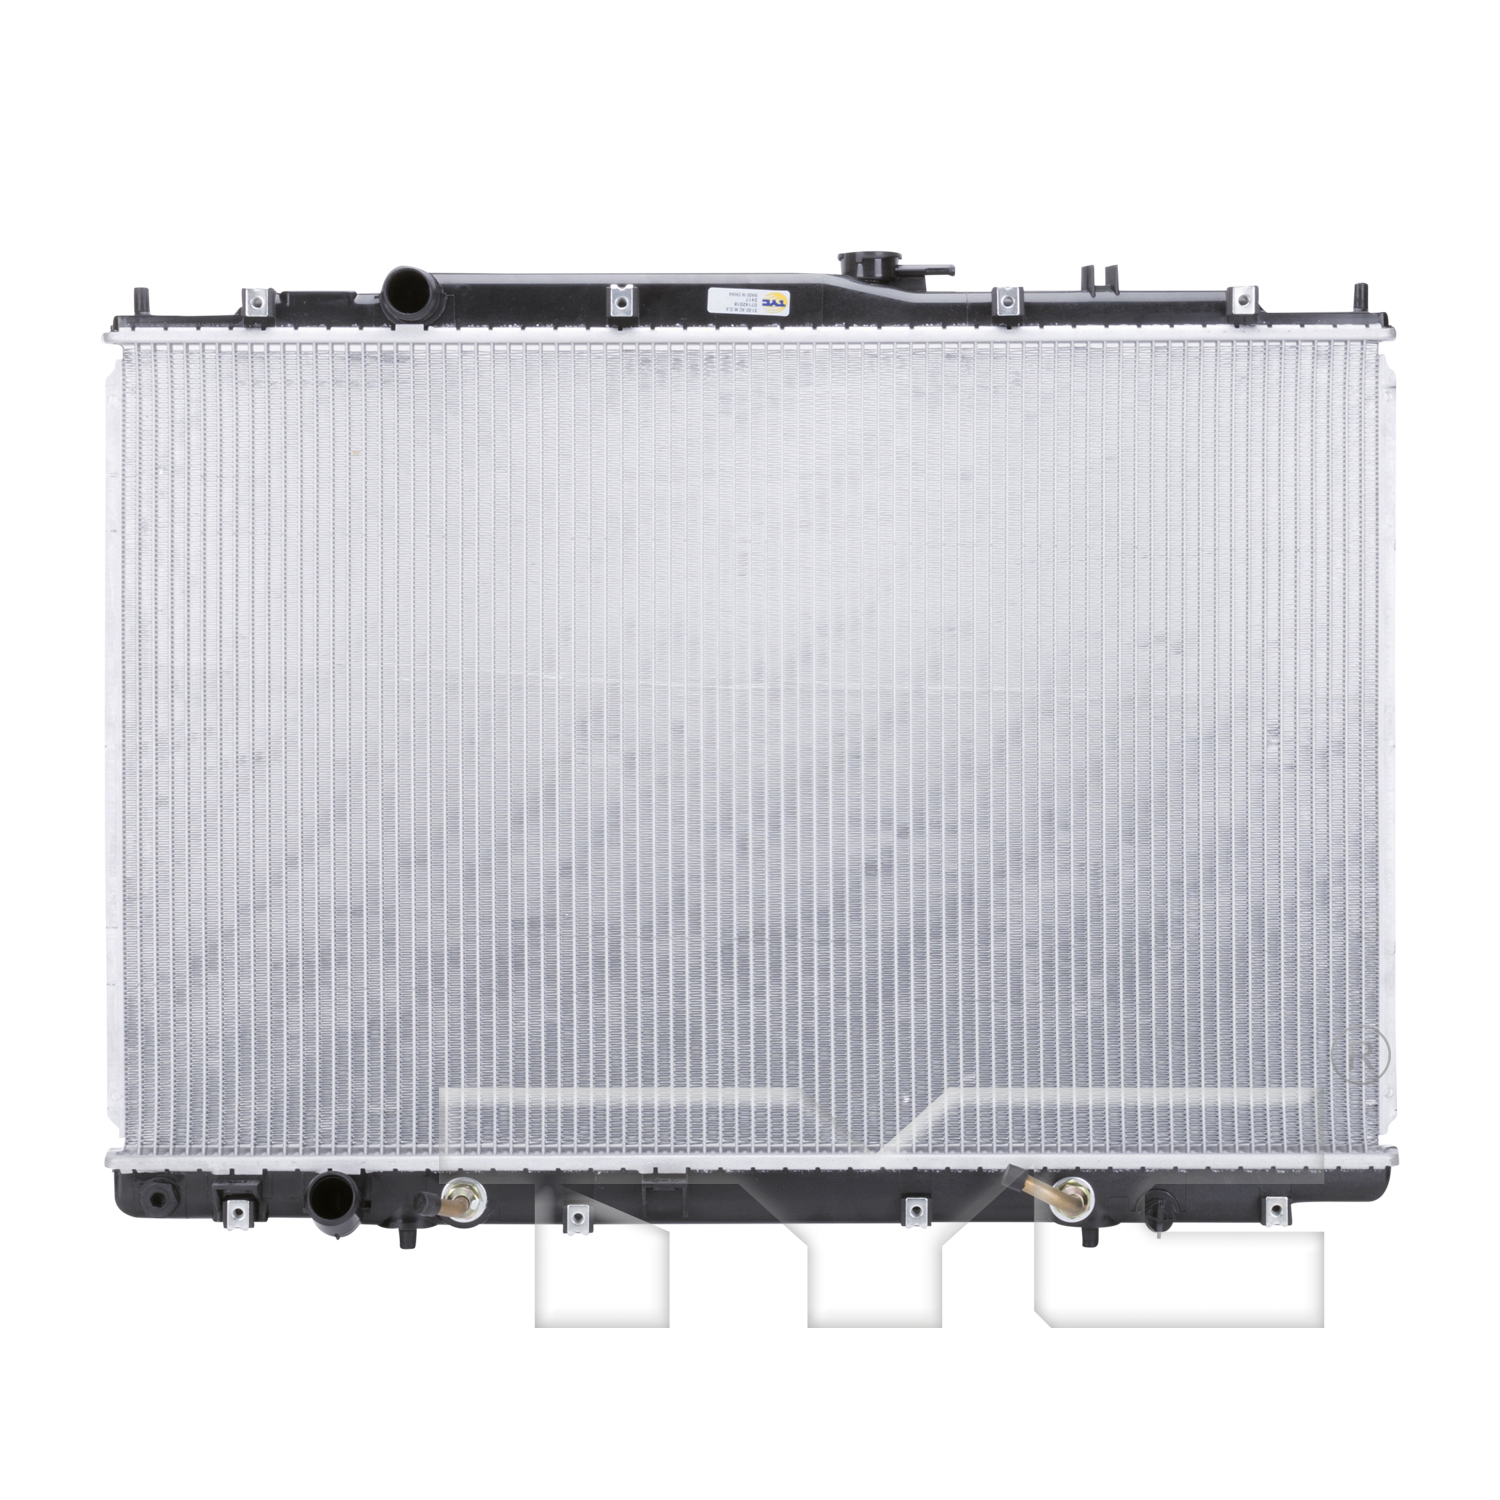 Aftermarket RADIATORS for ACURA - MDX, MDX,01-02,Radiator assembly